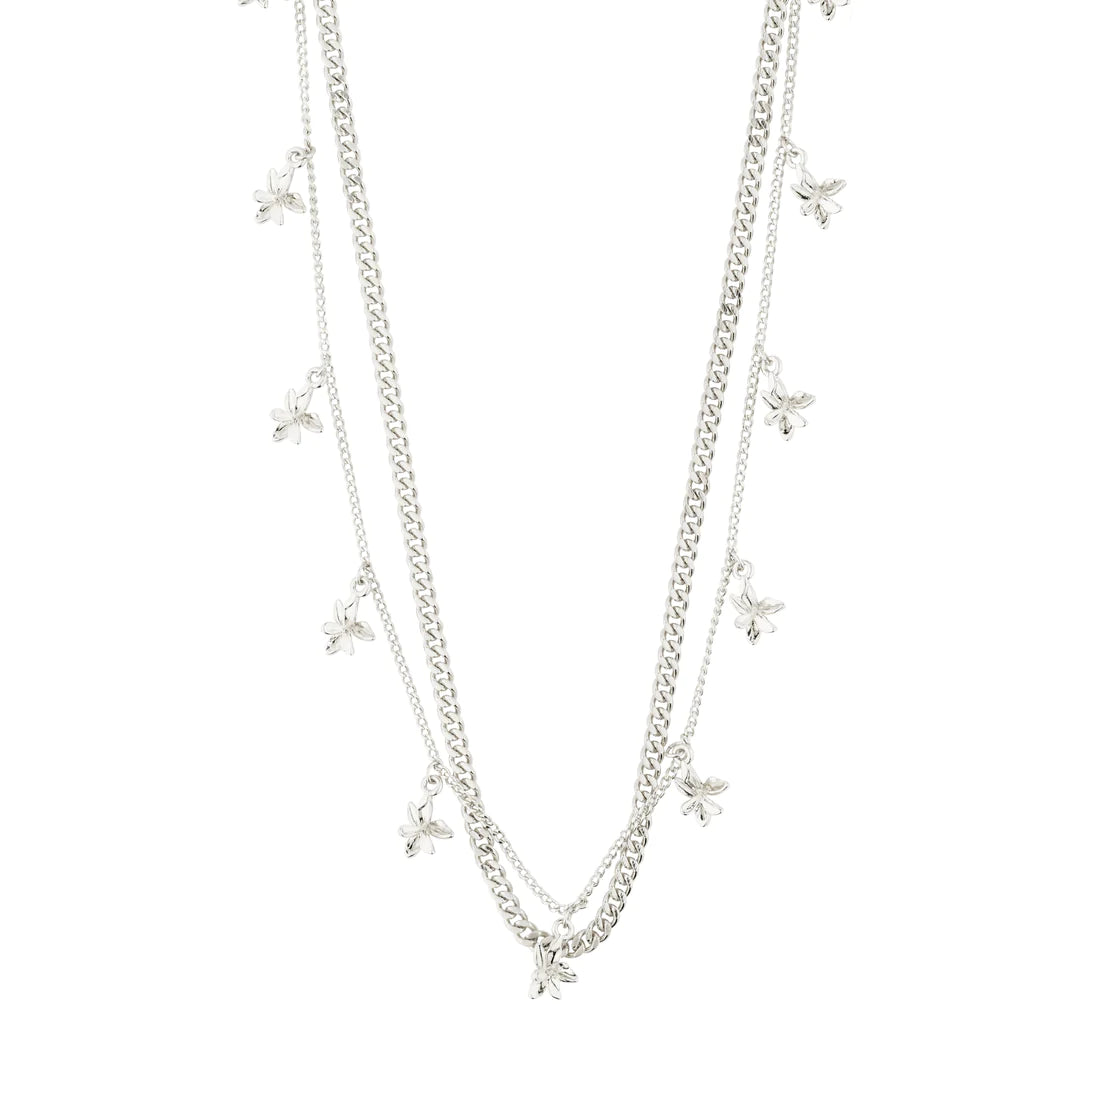 Riko 2-in-1 Necklace - silver